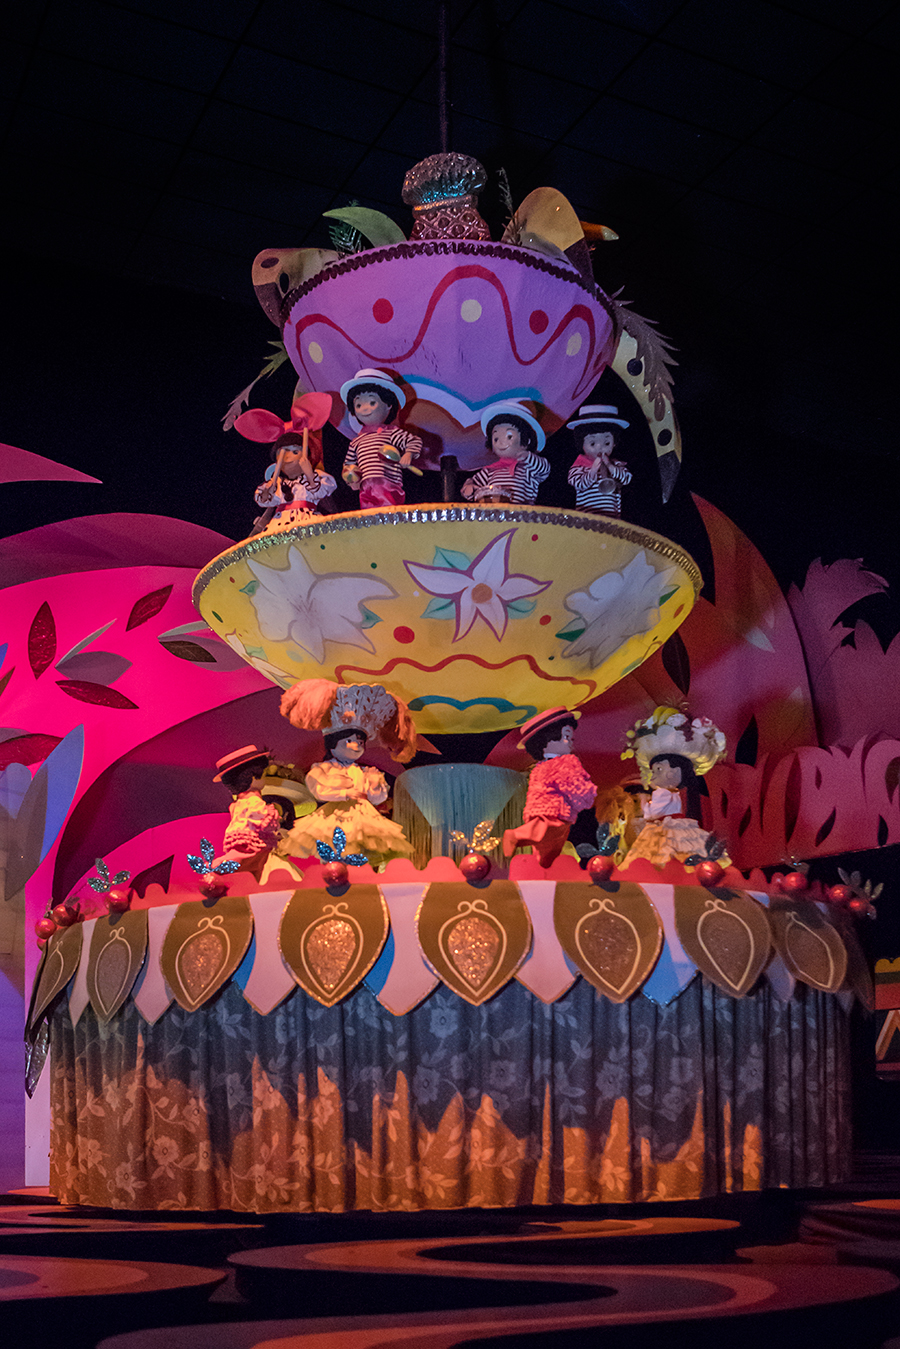 The Cultures of 'it's a small world' at Disneyland Park: Latin America